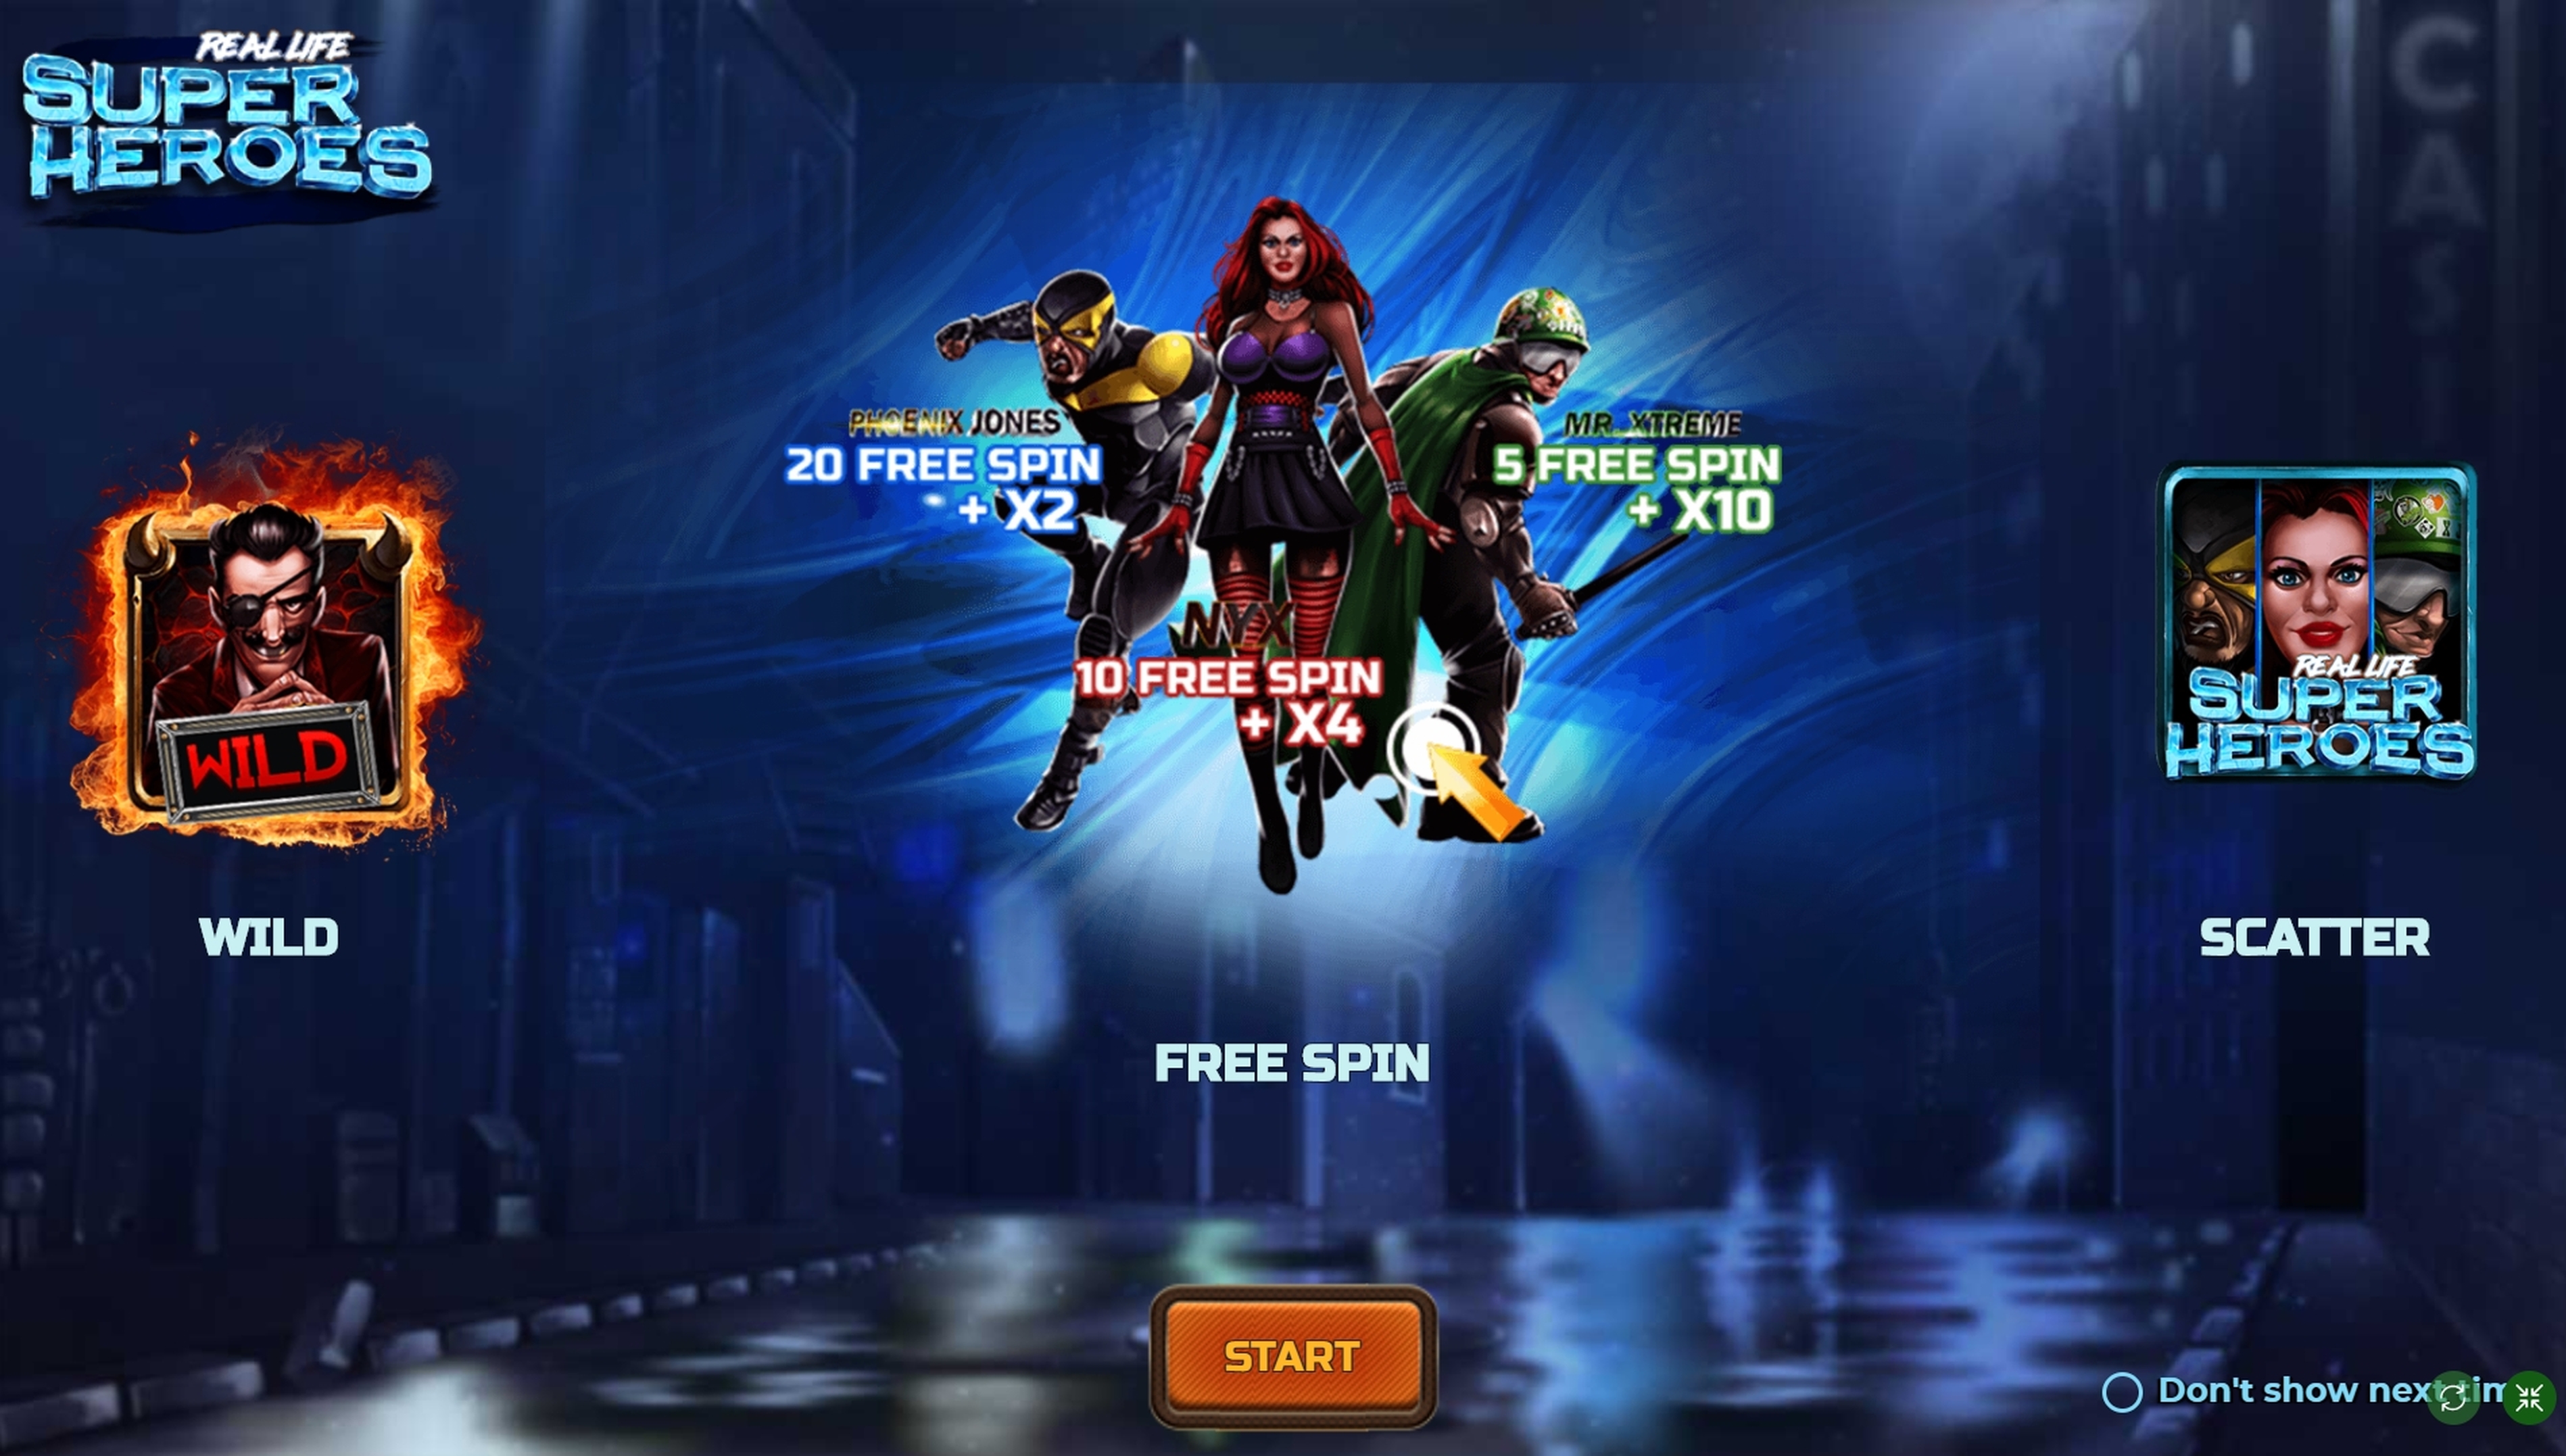 Play Real Life Super Heroes Free Casino Slot Game by Spinmatic